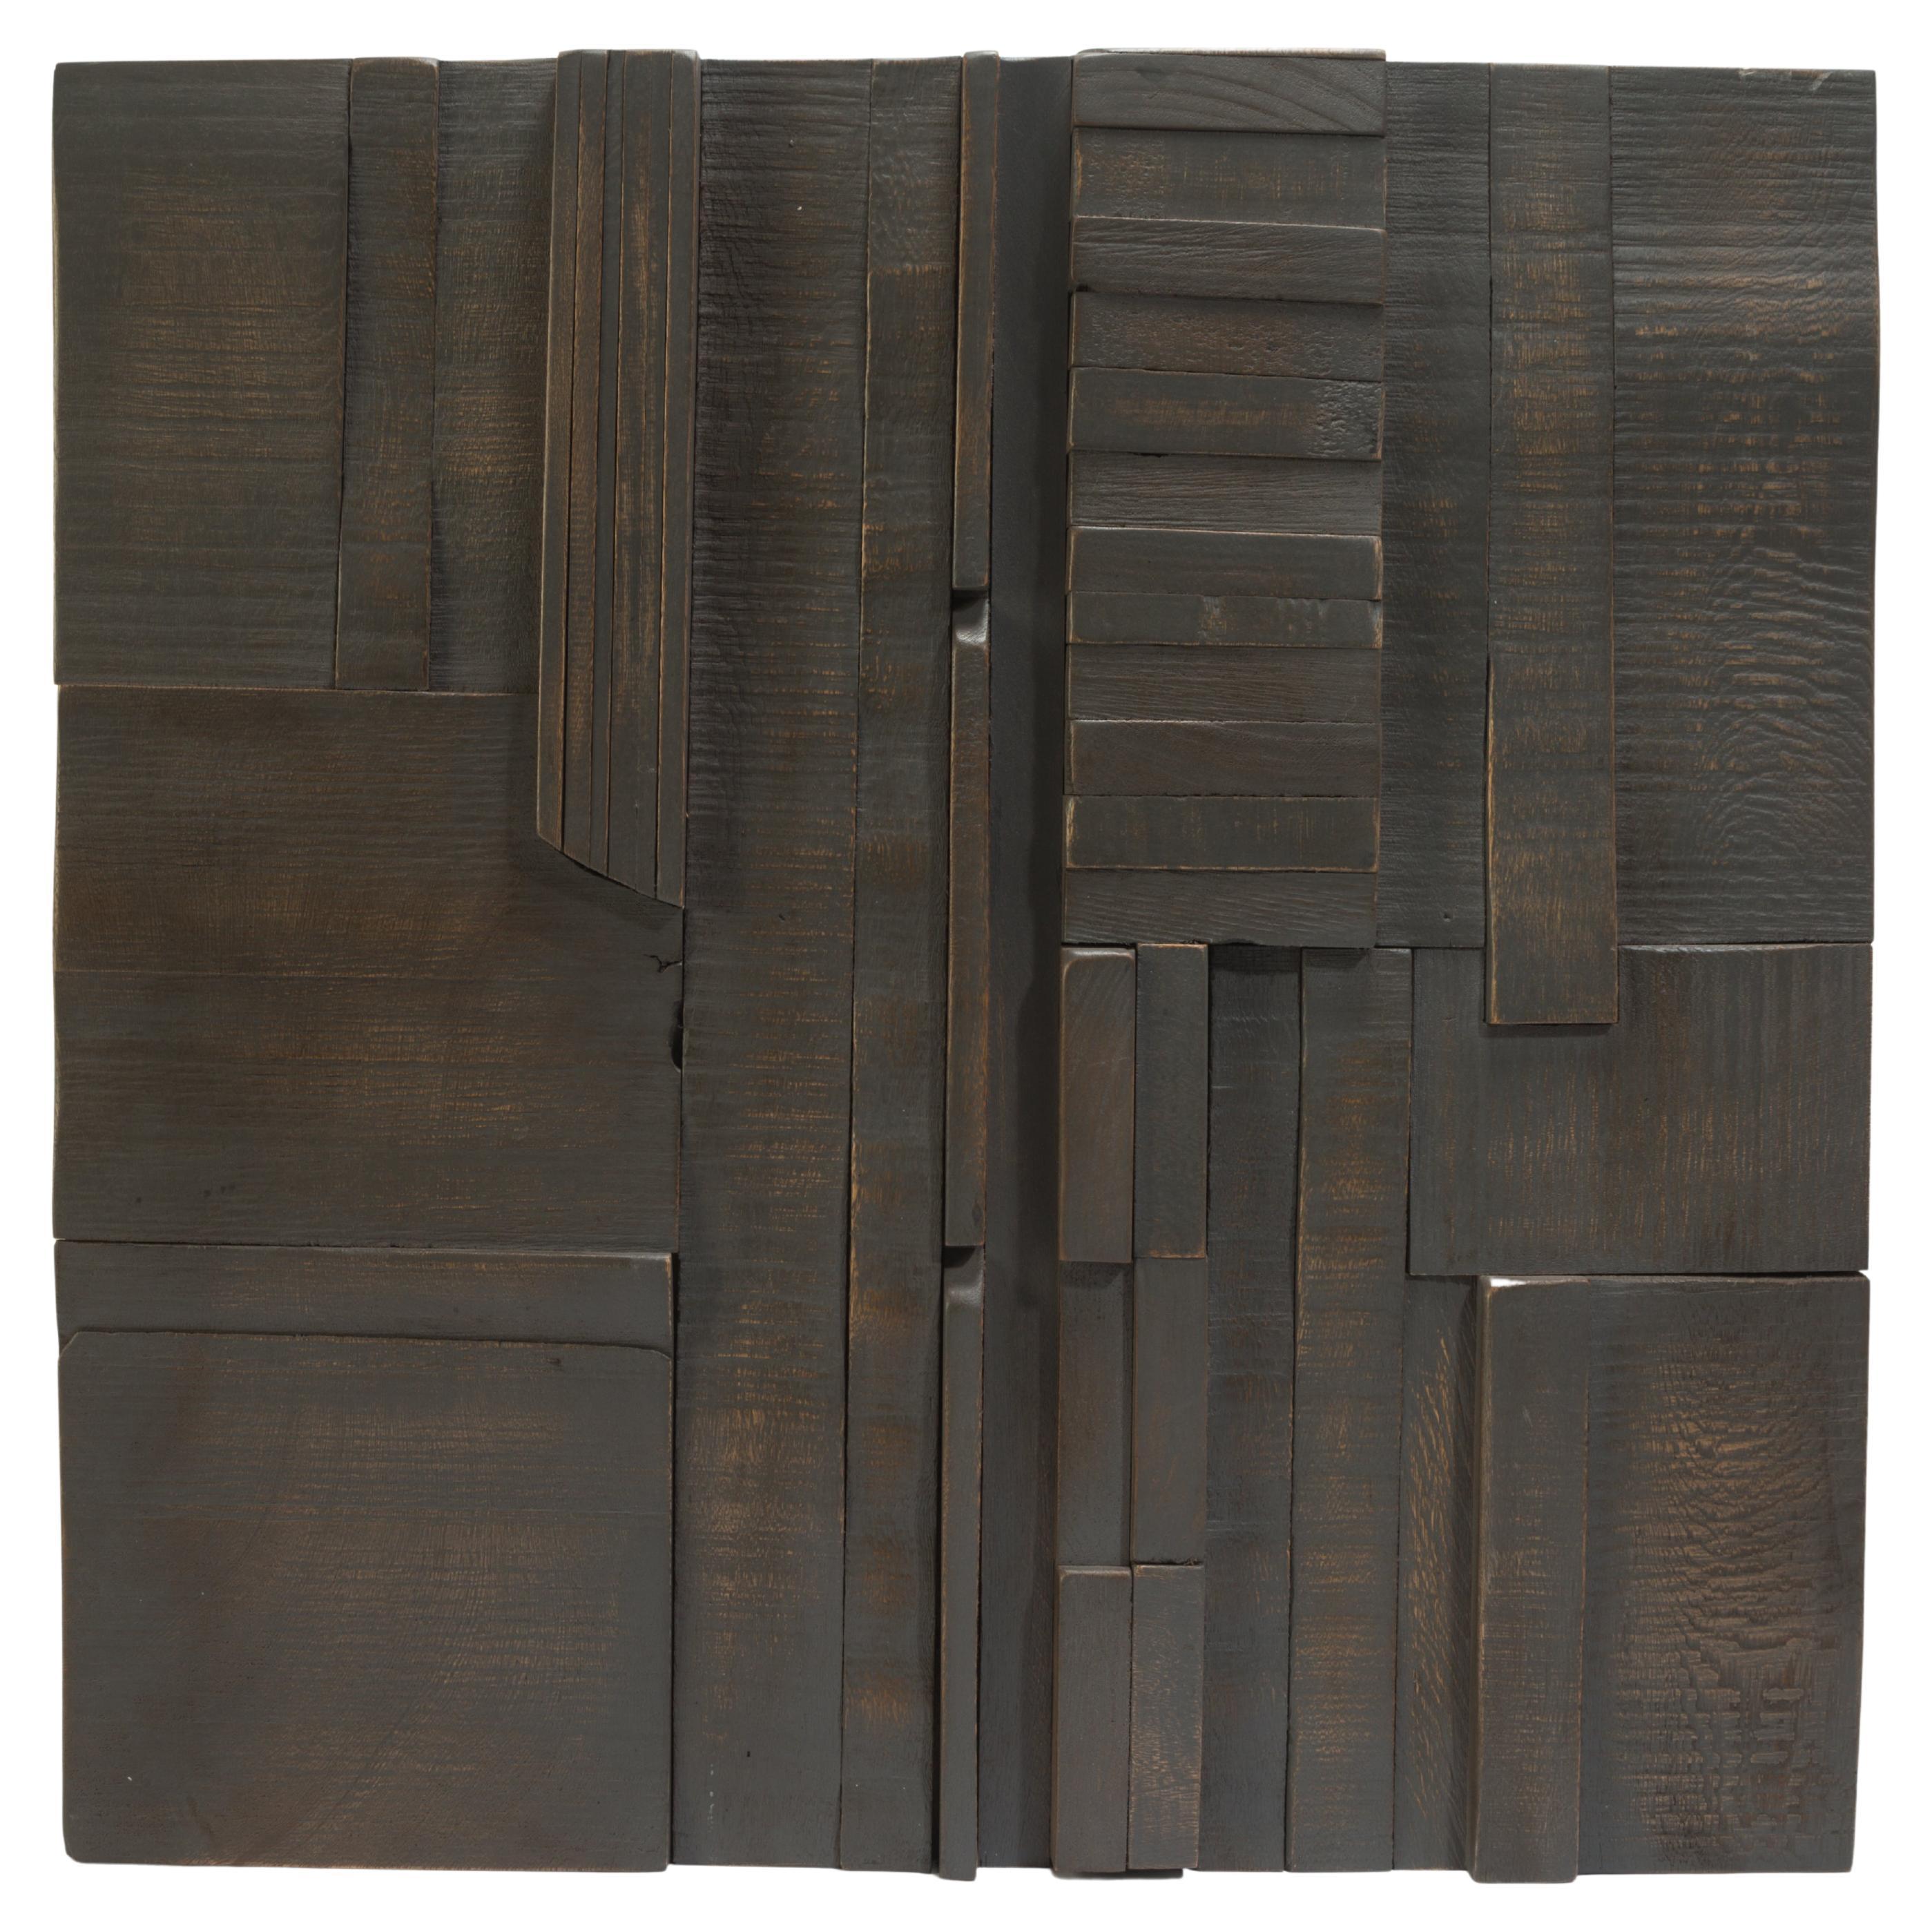 These CHARCOAL collage tiles are composed randomly from recycled wood remnants and when installed bathe any space with a warm feeling and texture which is meditative, sanded to a soft finish and protected with lacquer and wax. The works convey an